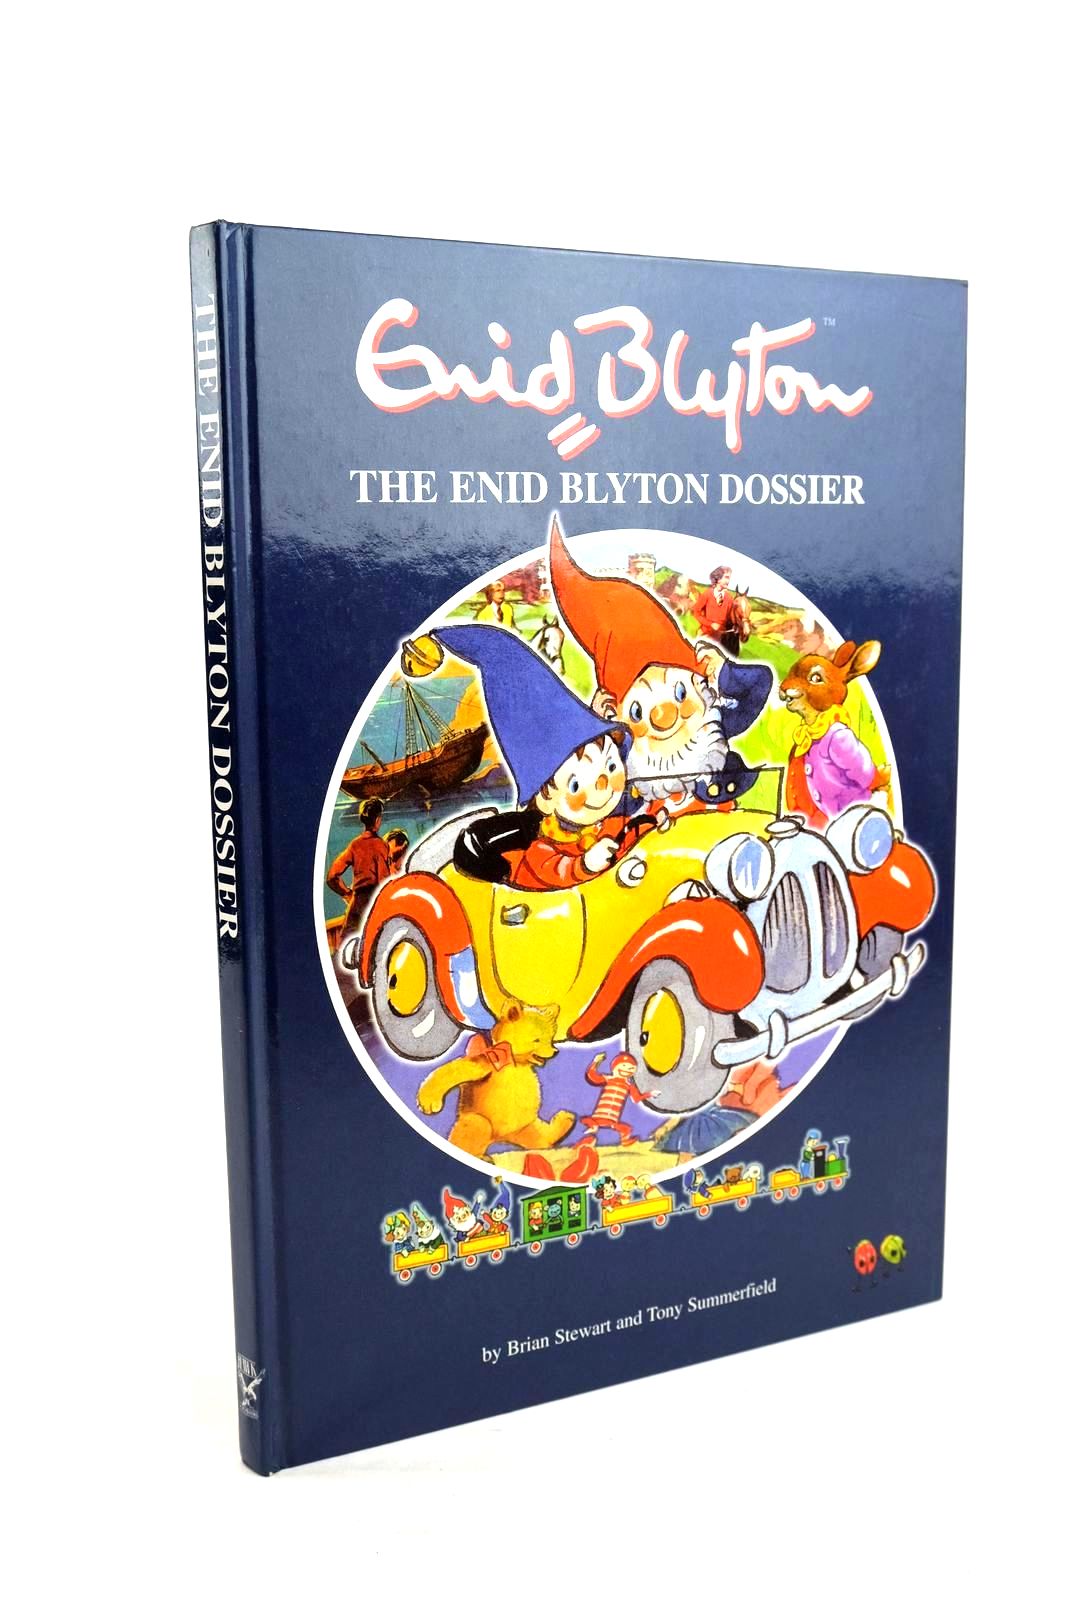 Photo of THE ENID BLYTON DOSSIER- Stock Number: 1320338